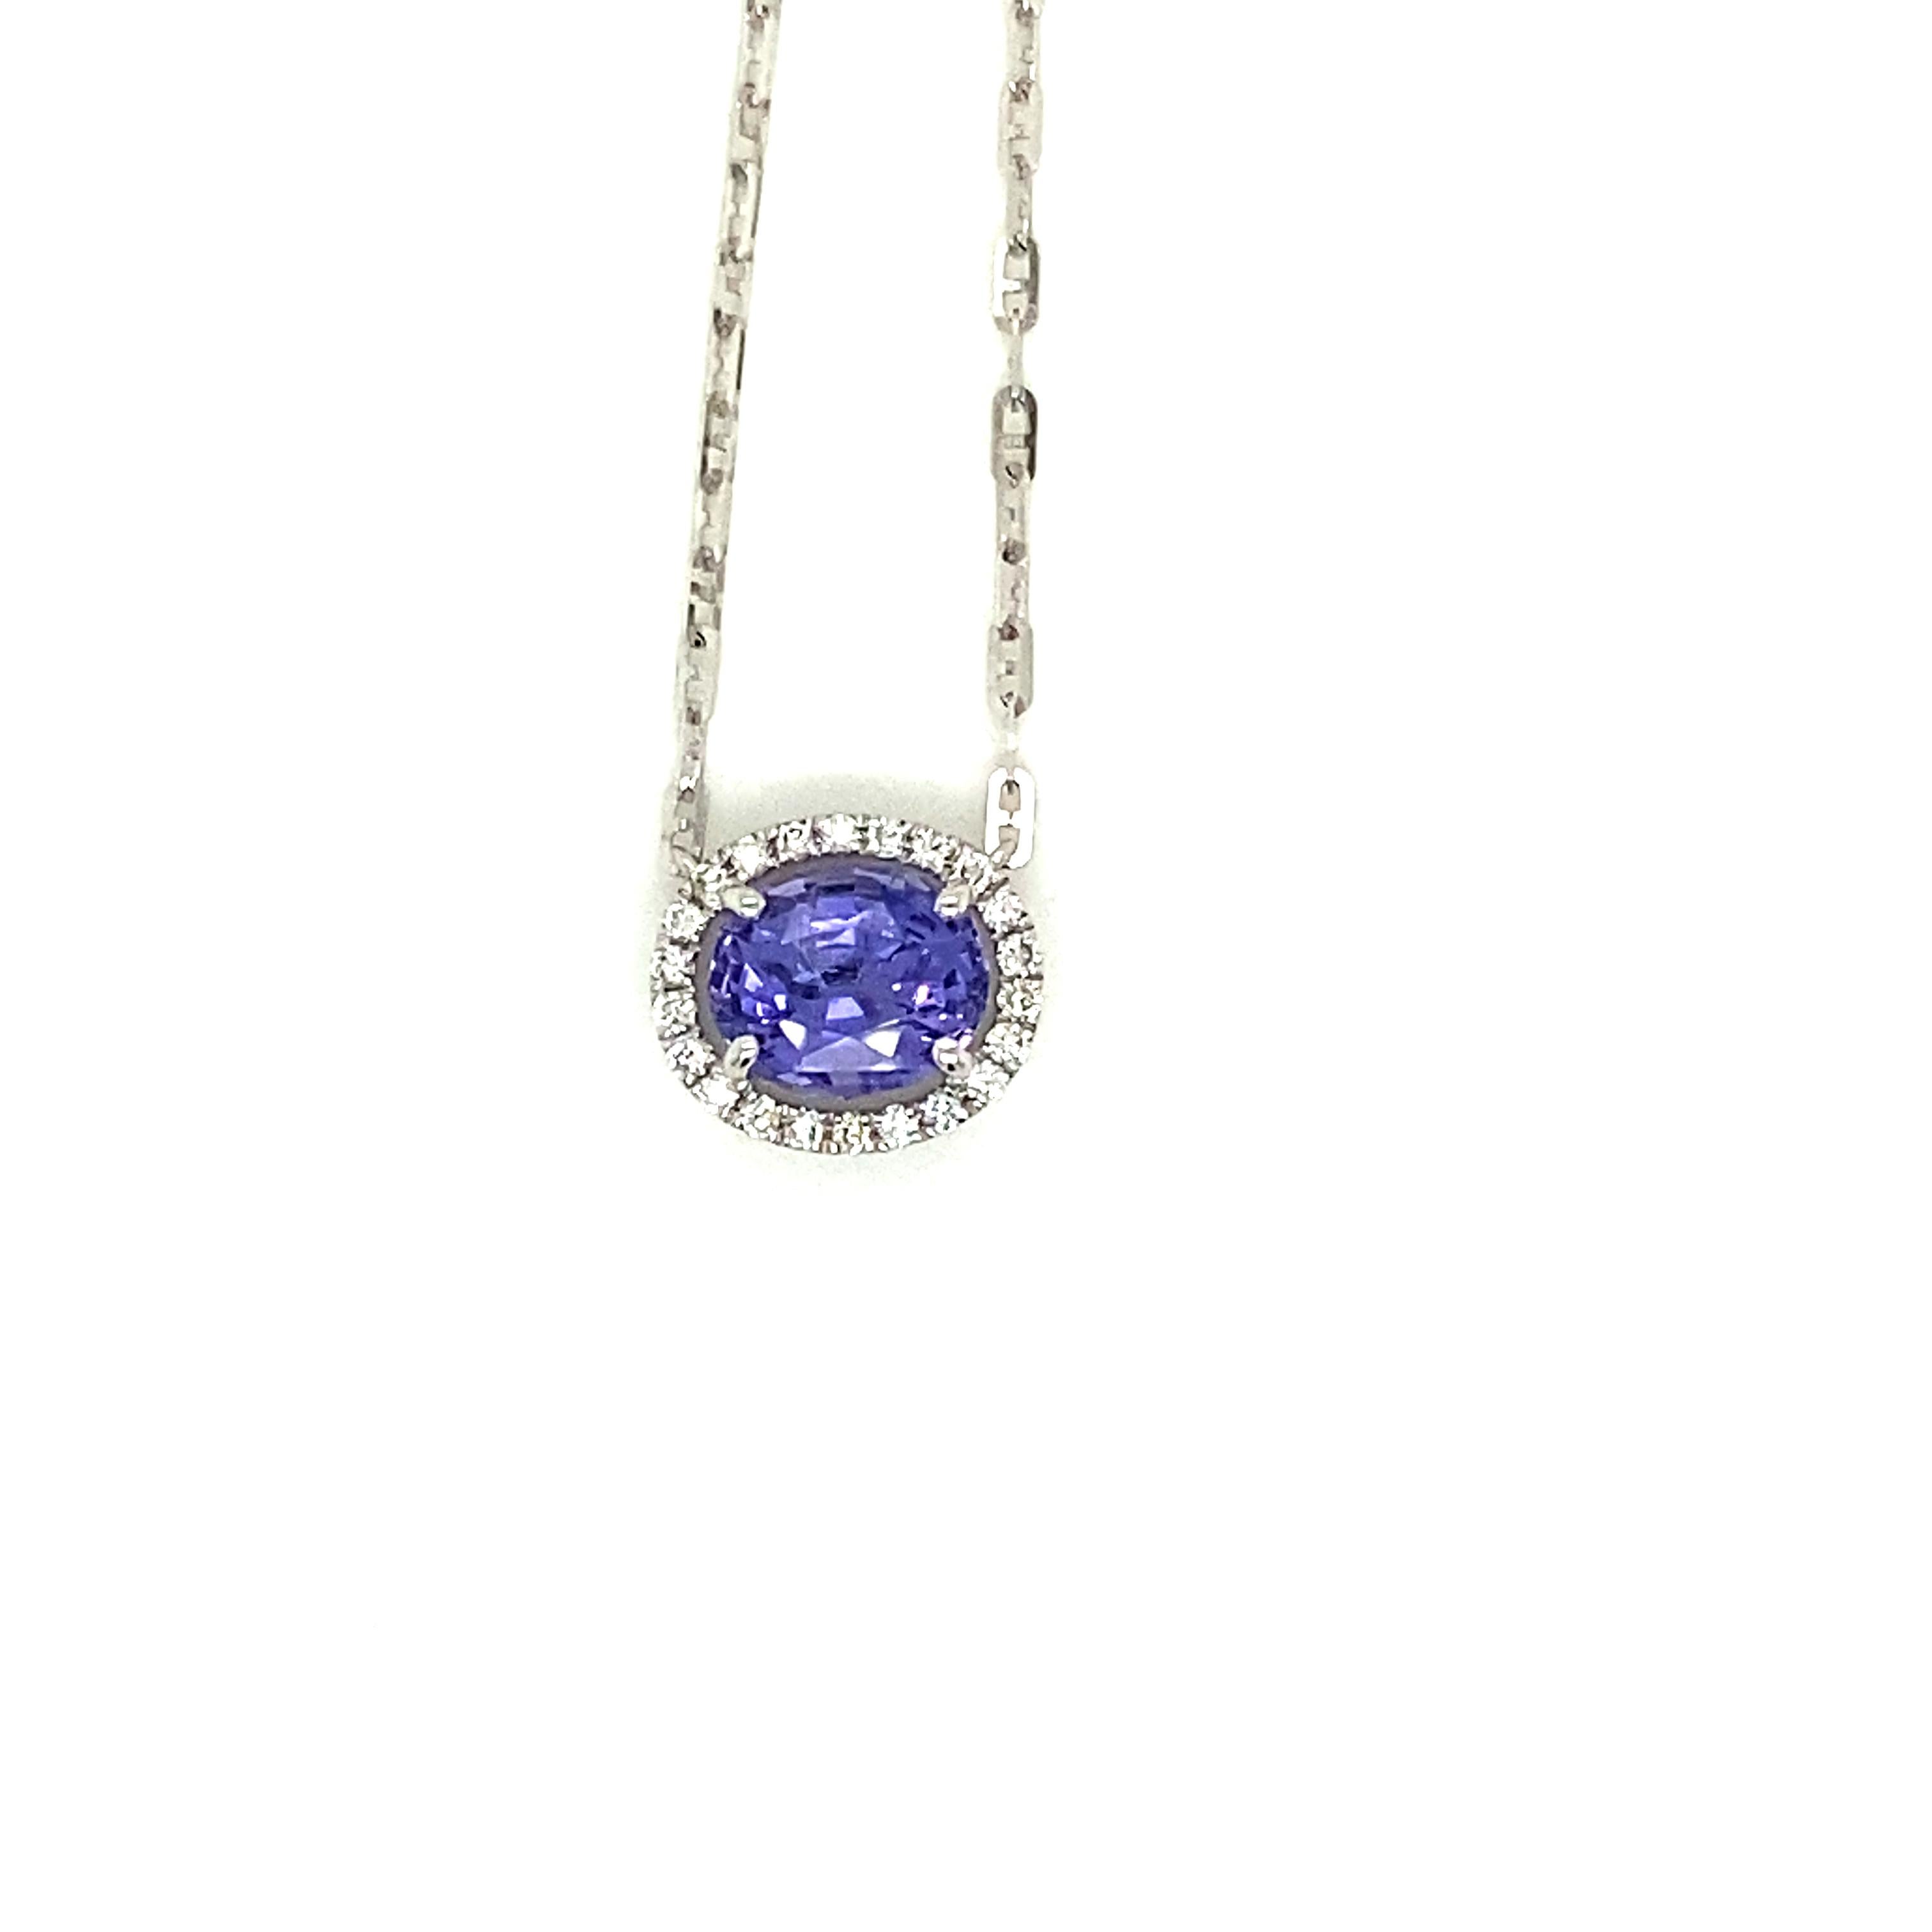 1.77 Carat Oval-Cut Purple Sapphire and White Diamond Pendant Necklace:

A beautiful pendant necklace, it features a 1.77 carat oval-cut purple sapphire in the centre surrounded by a halo of white round-brilliant cut diamonds weighing 0.12 carat.